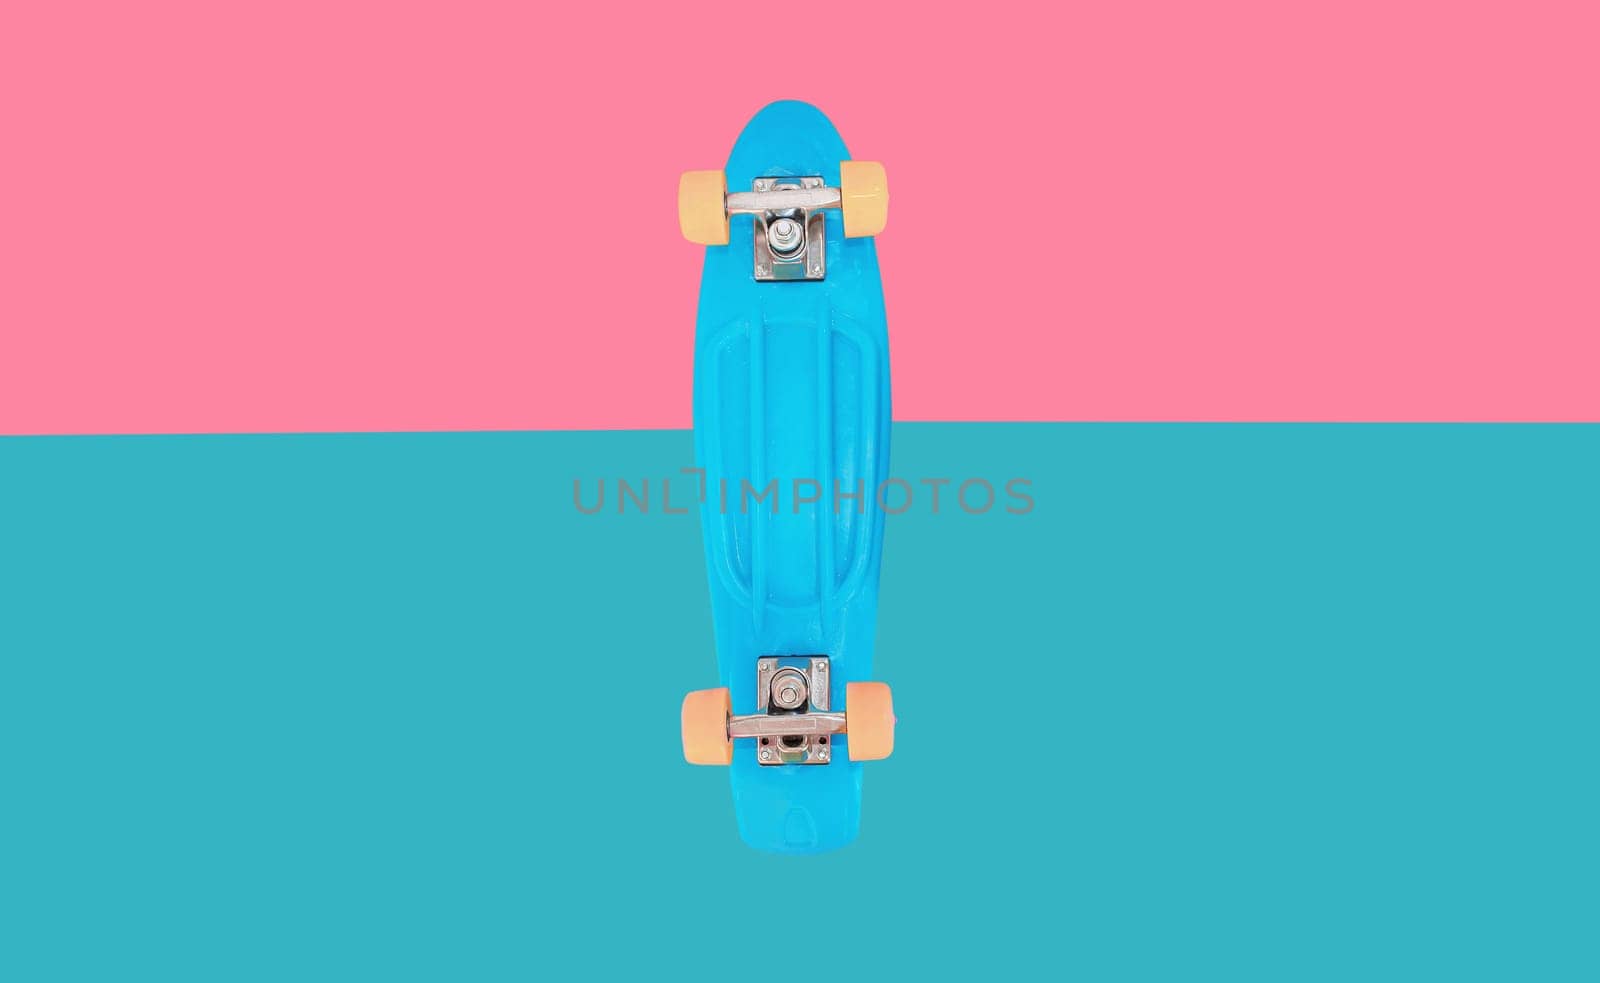 Stylish blue skateboard on colorful pink background by Rohappy